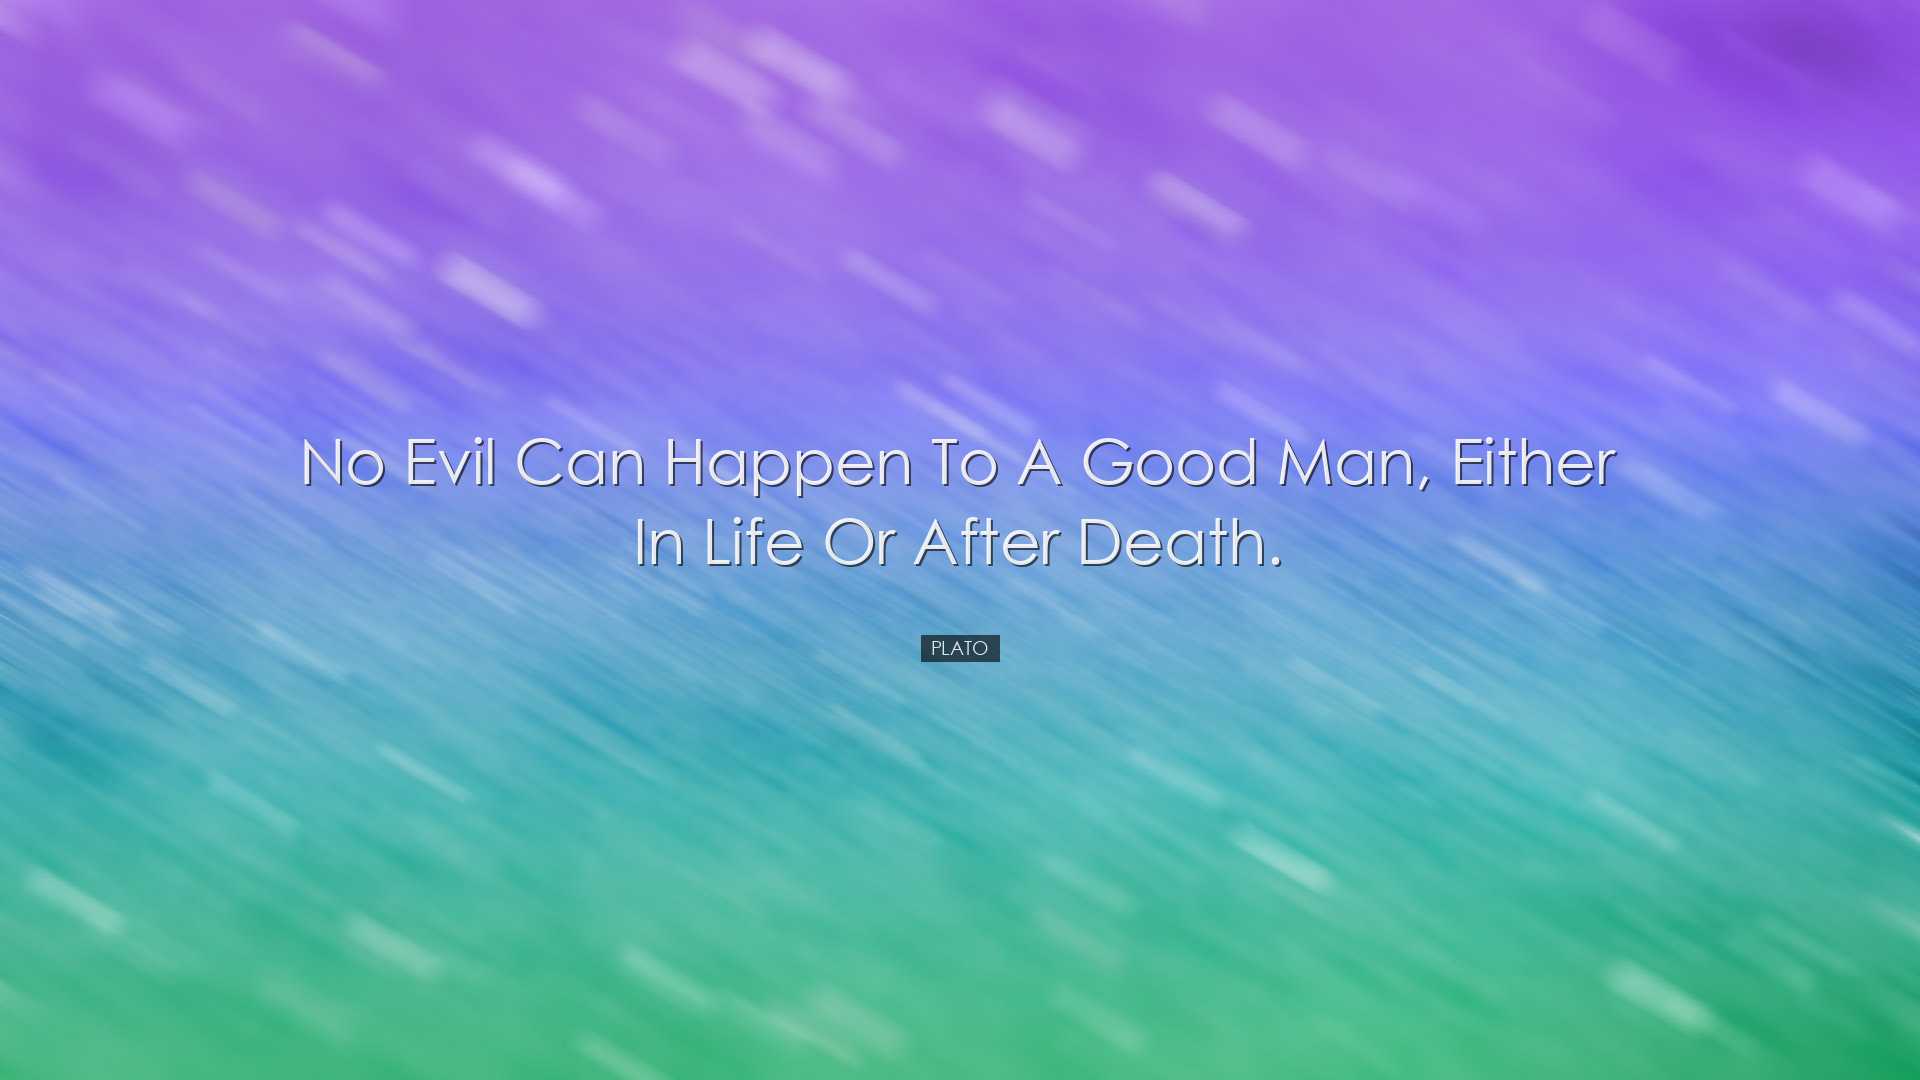 No evil can happen to a good man, either in life or after death. -